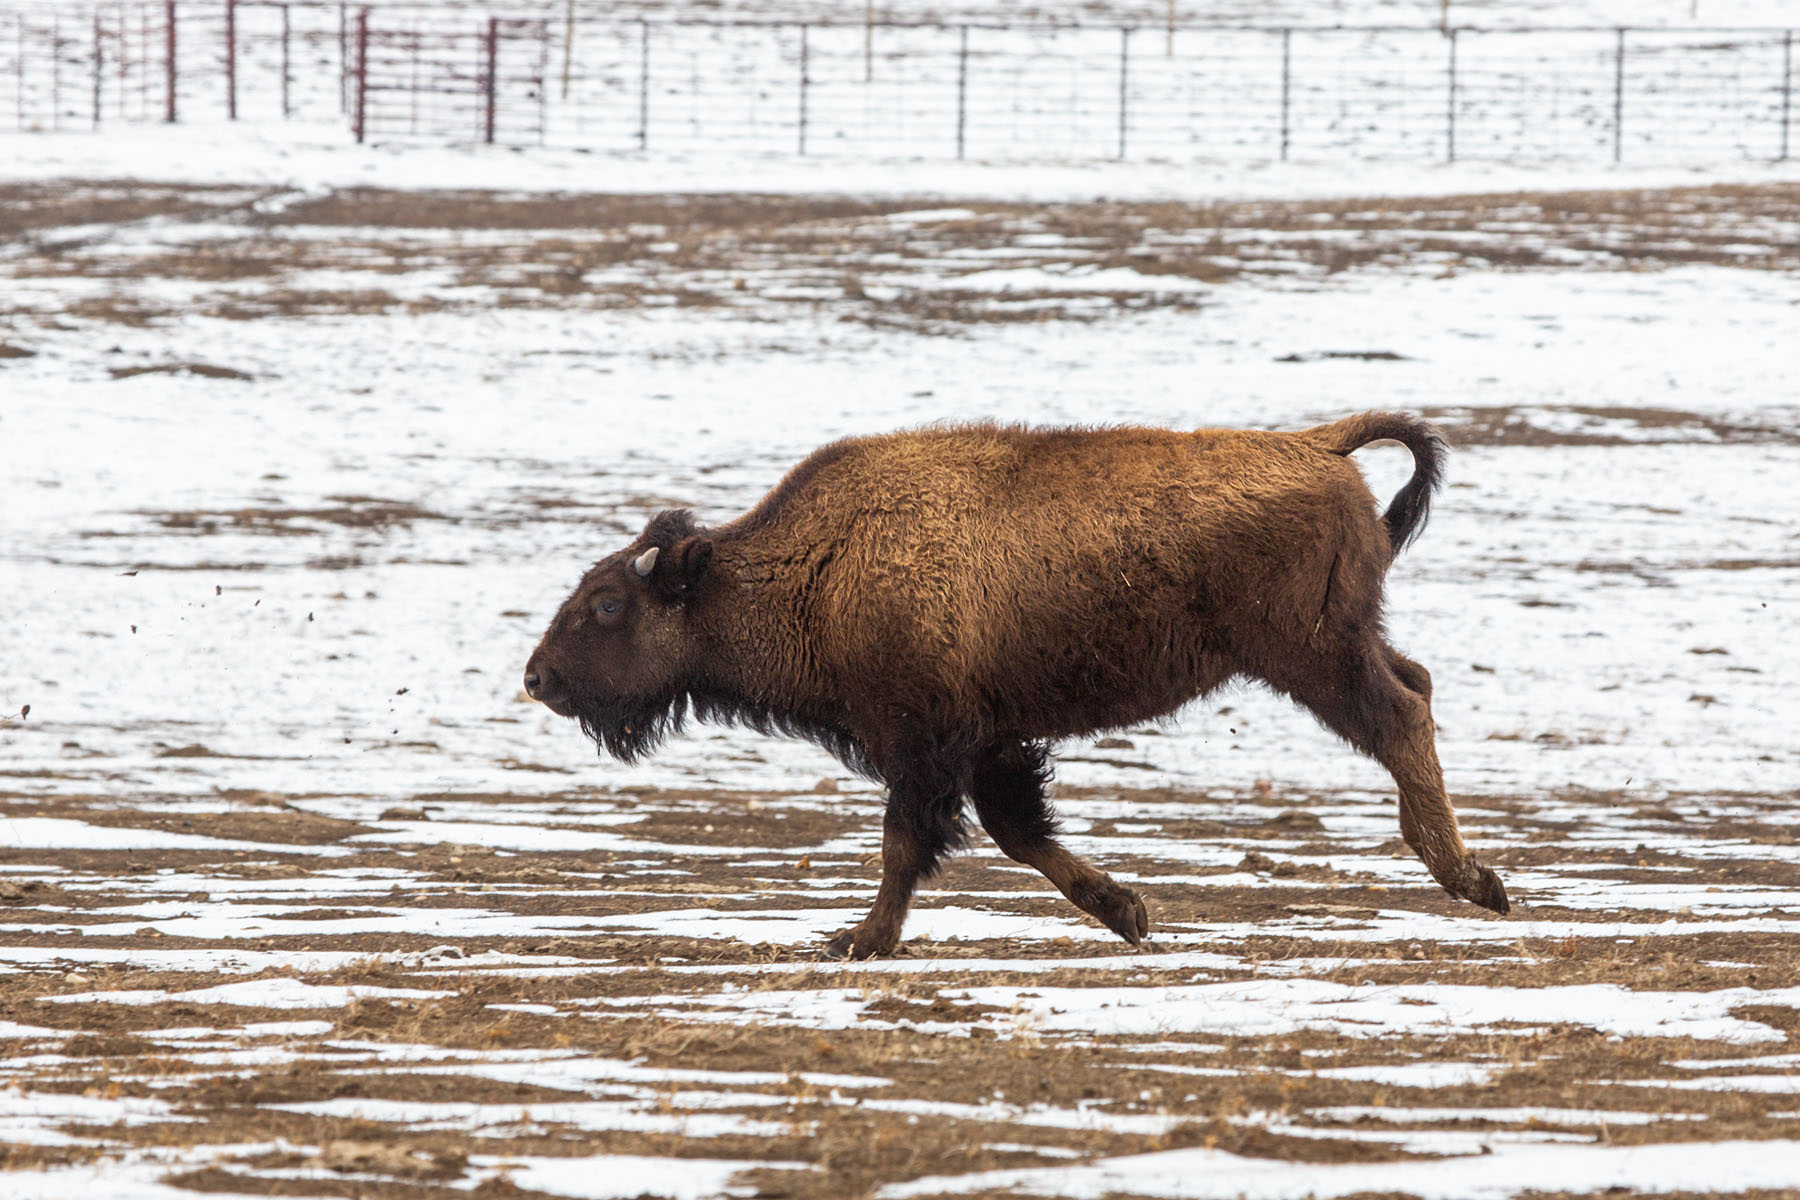 Young bison on the run, Badlands National Park.  Click for next photo.